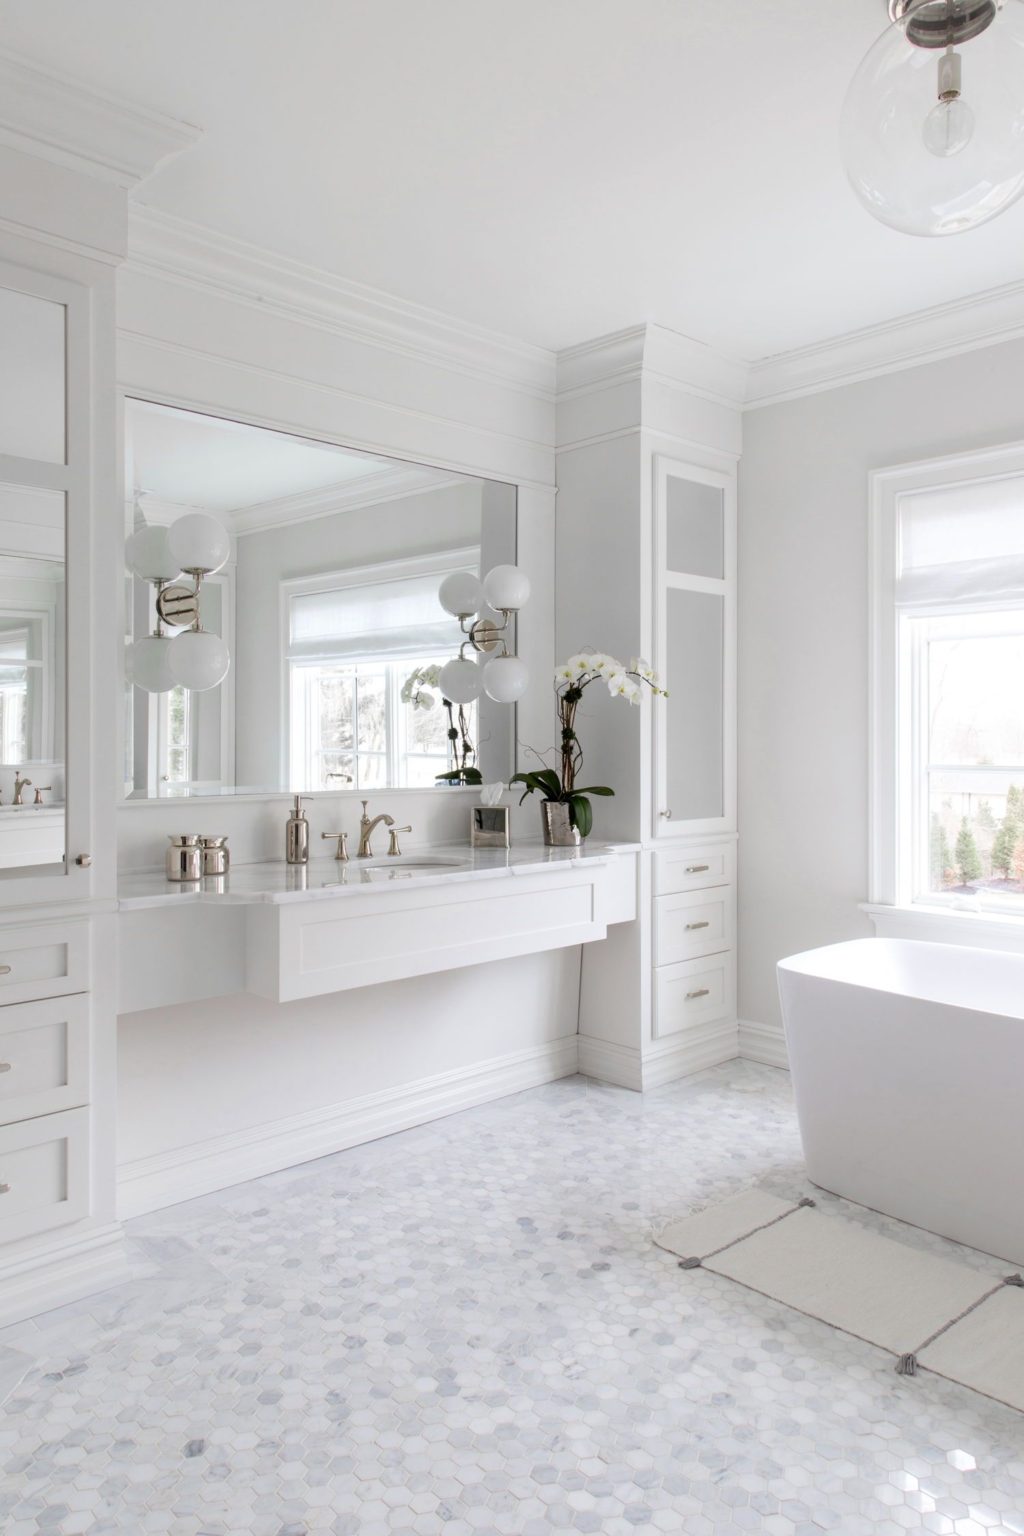 All whites design. Top 10 Outdated Bathroom Design Trends to Avoid - 12